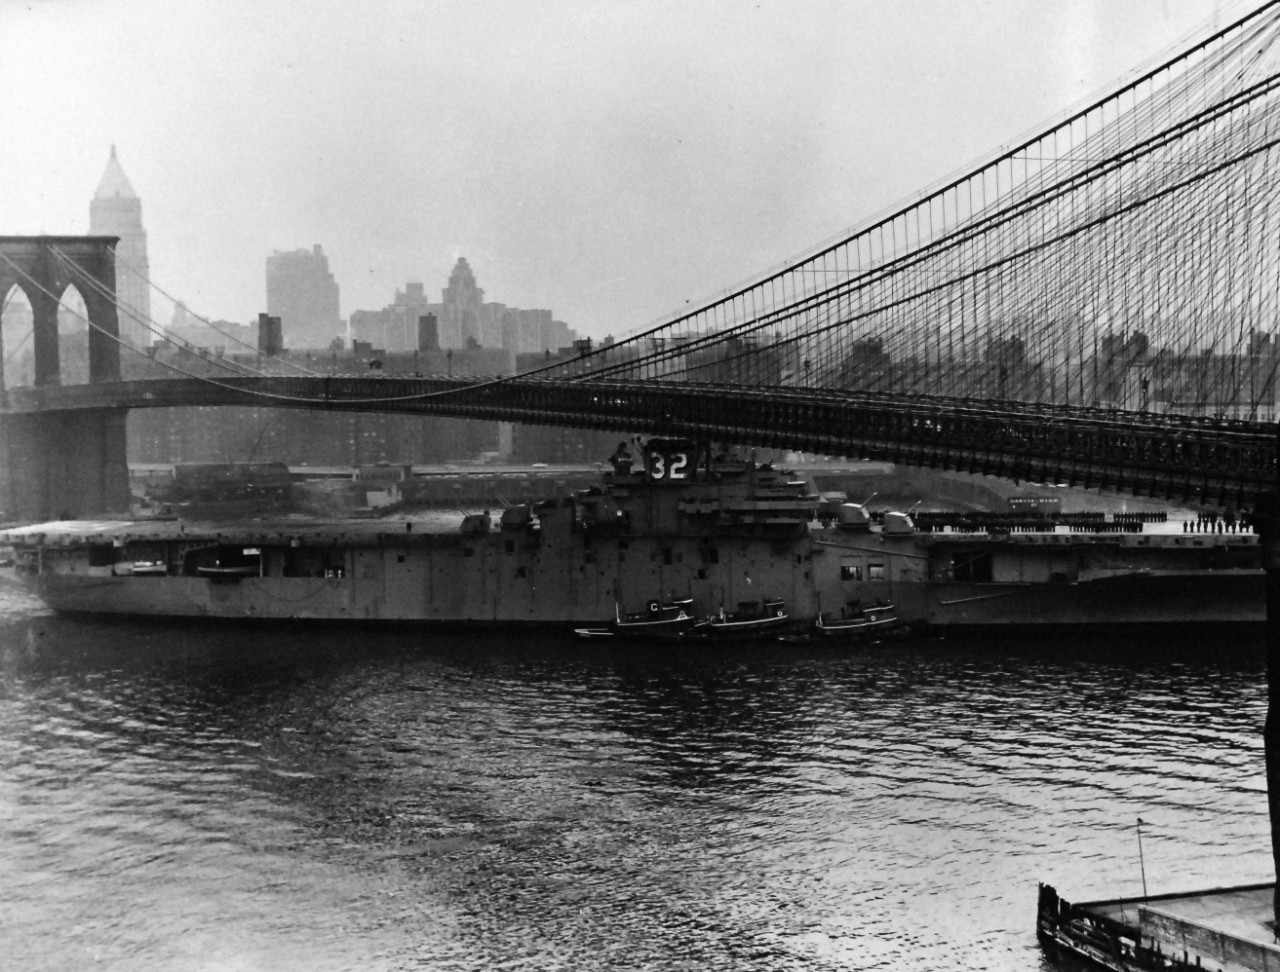 80-G-686302:   USS Leyte (CVS-32), squeezing under the Brooklyn Bridge.  Radar antennae and mast had to be removed, 19 February 1956.   Official U.S. Navy Photograph, now in the collections of the National Archives.  (2013/09/16). 